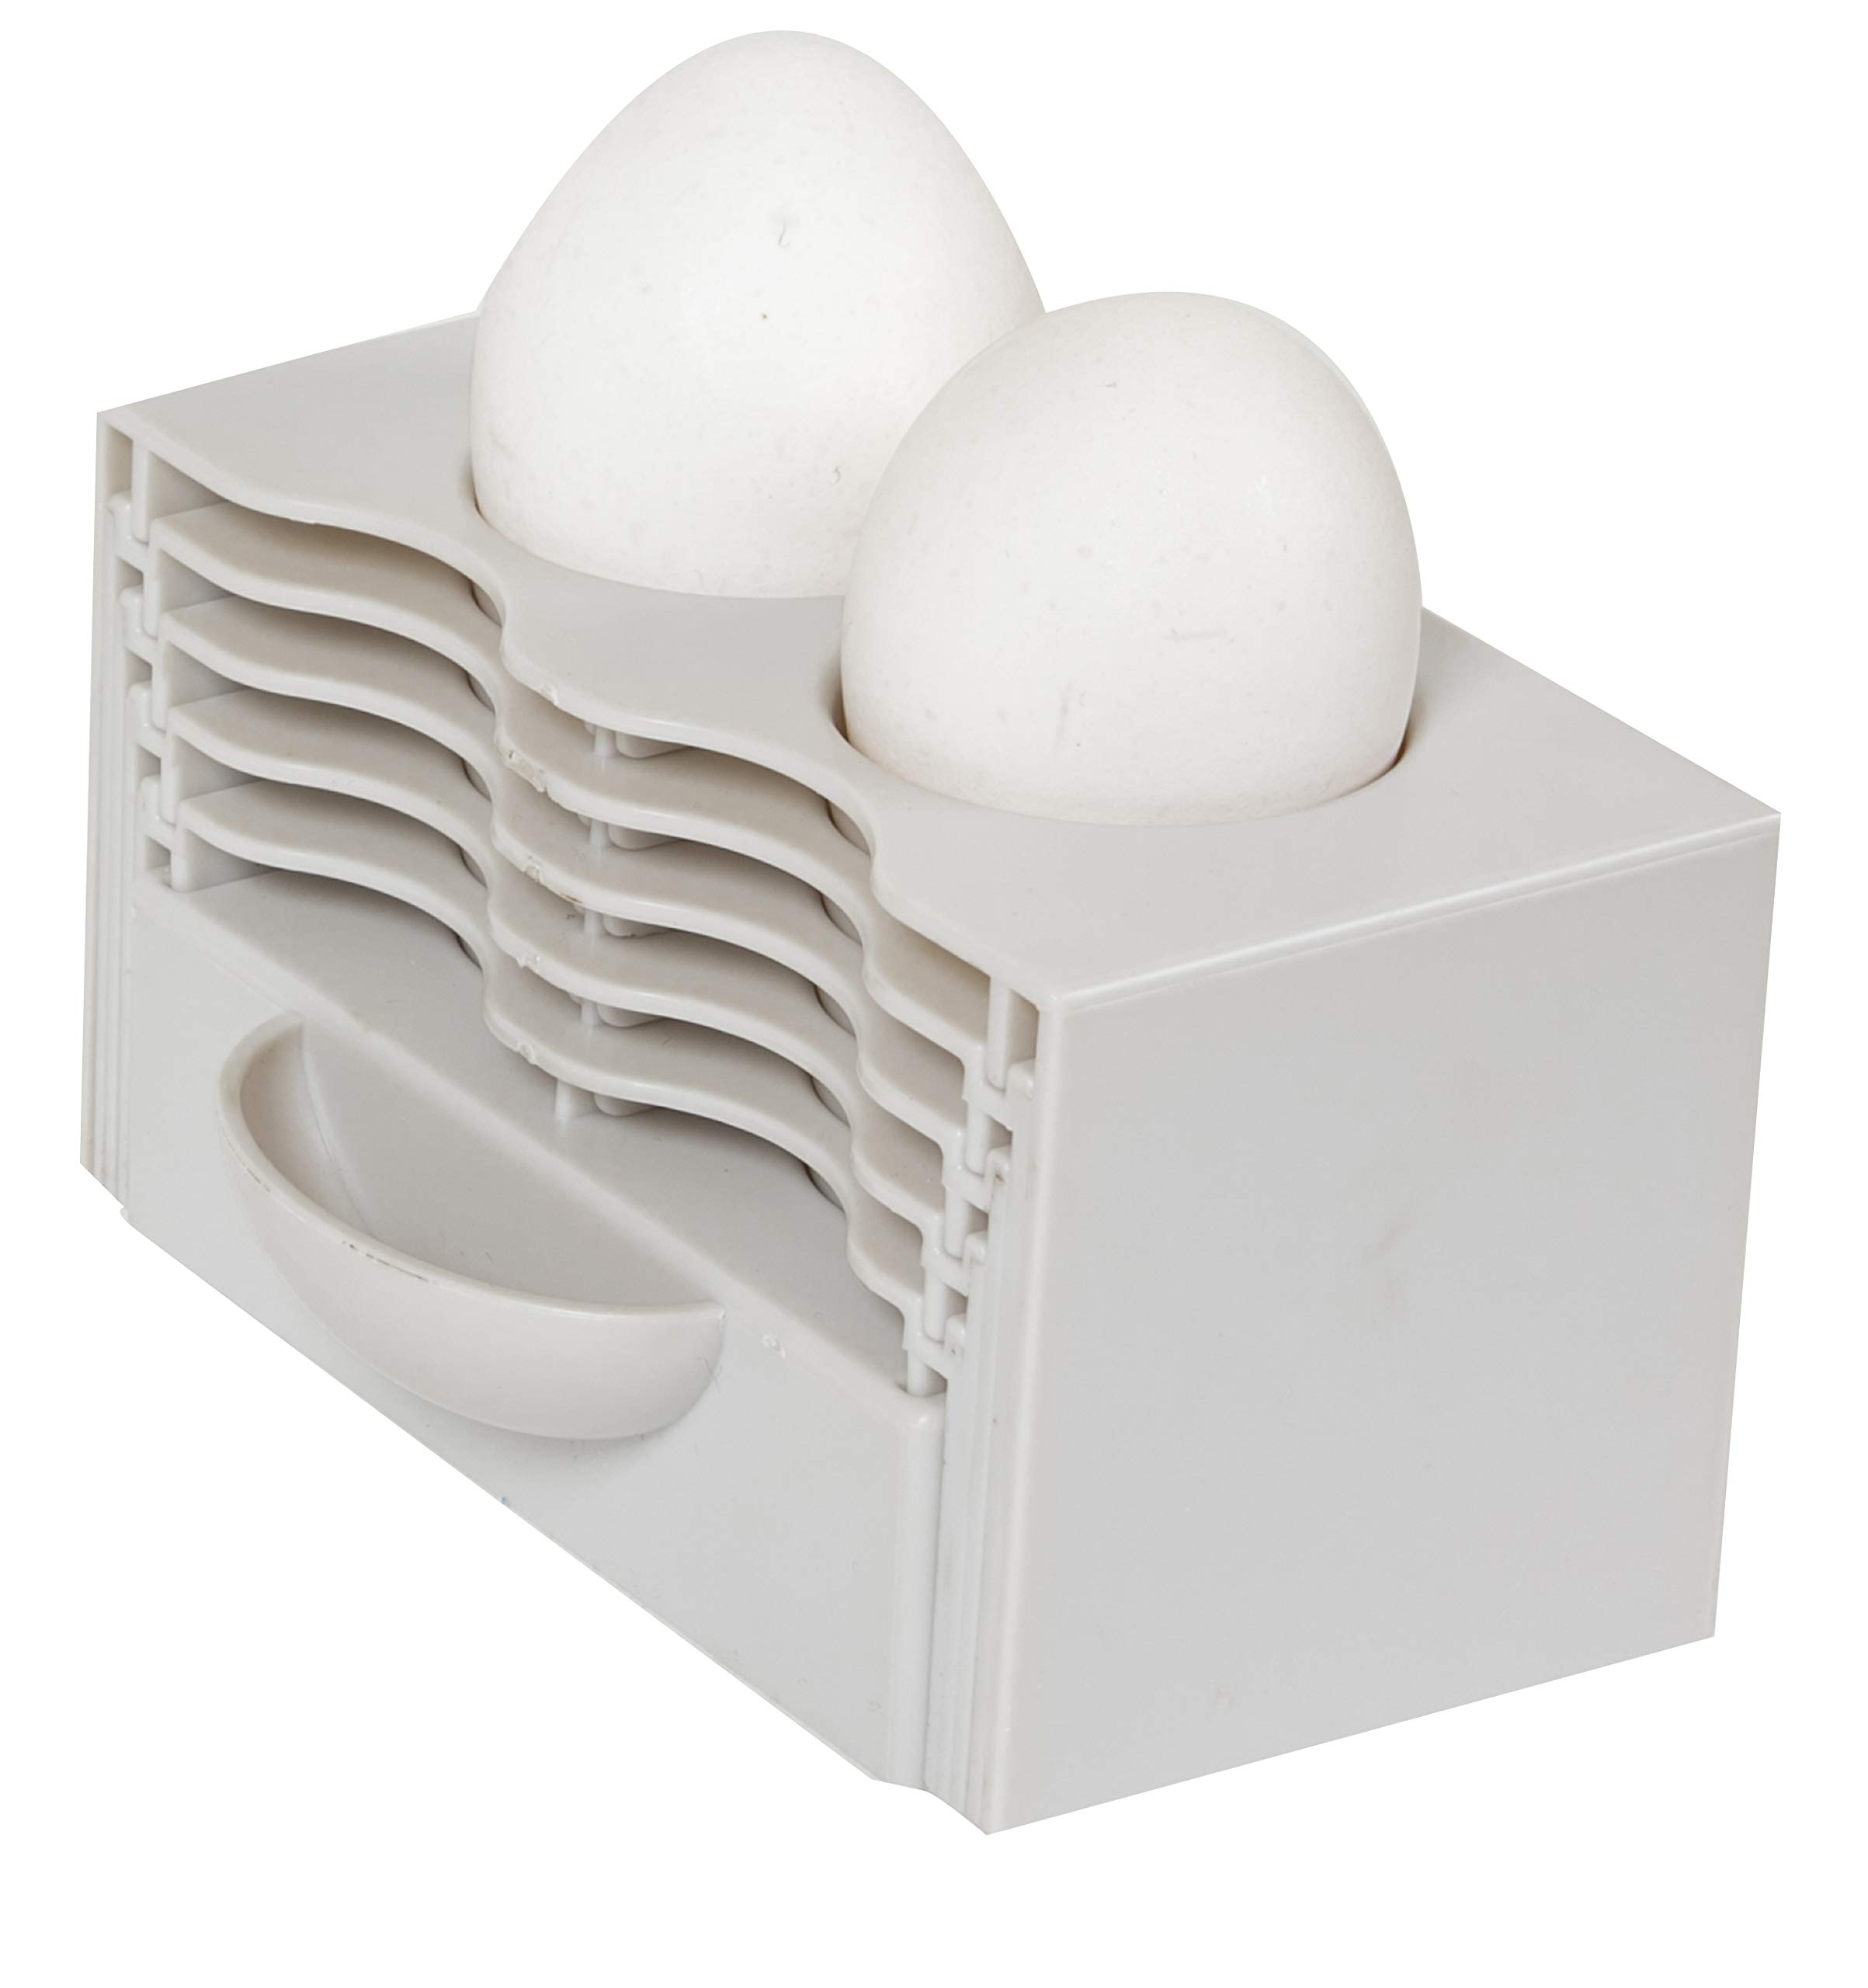 Think Up Designs Eggstra Space Collapsible Egg Storage Tray- Save Space in Your Fridge